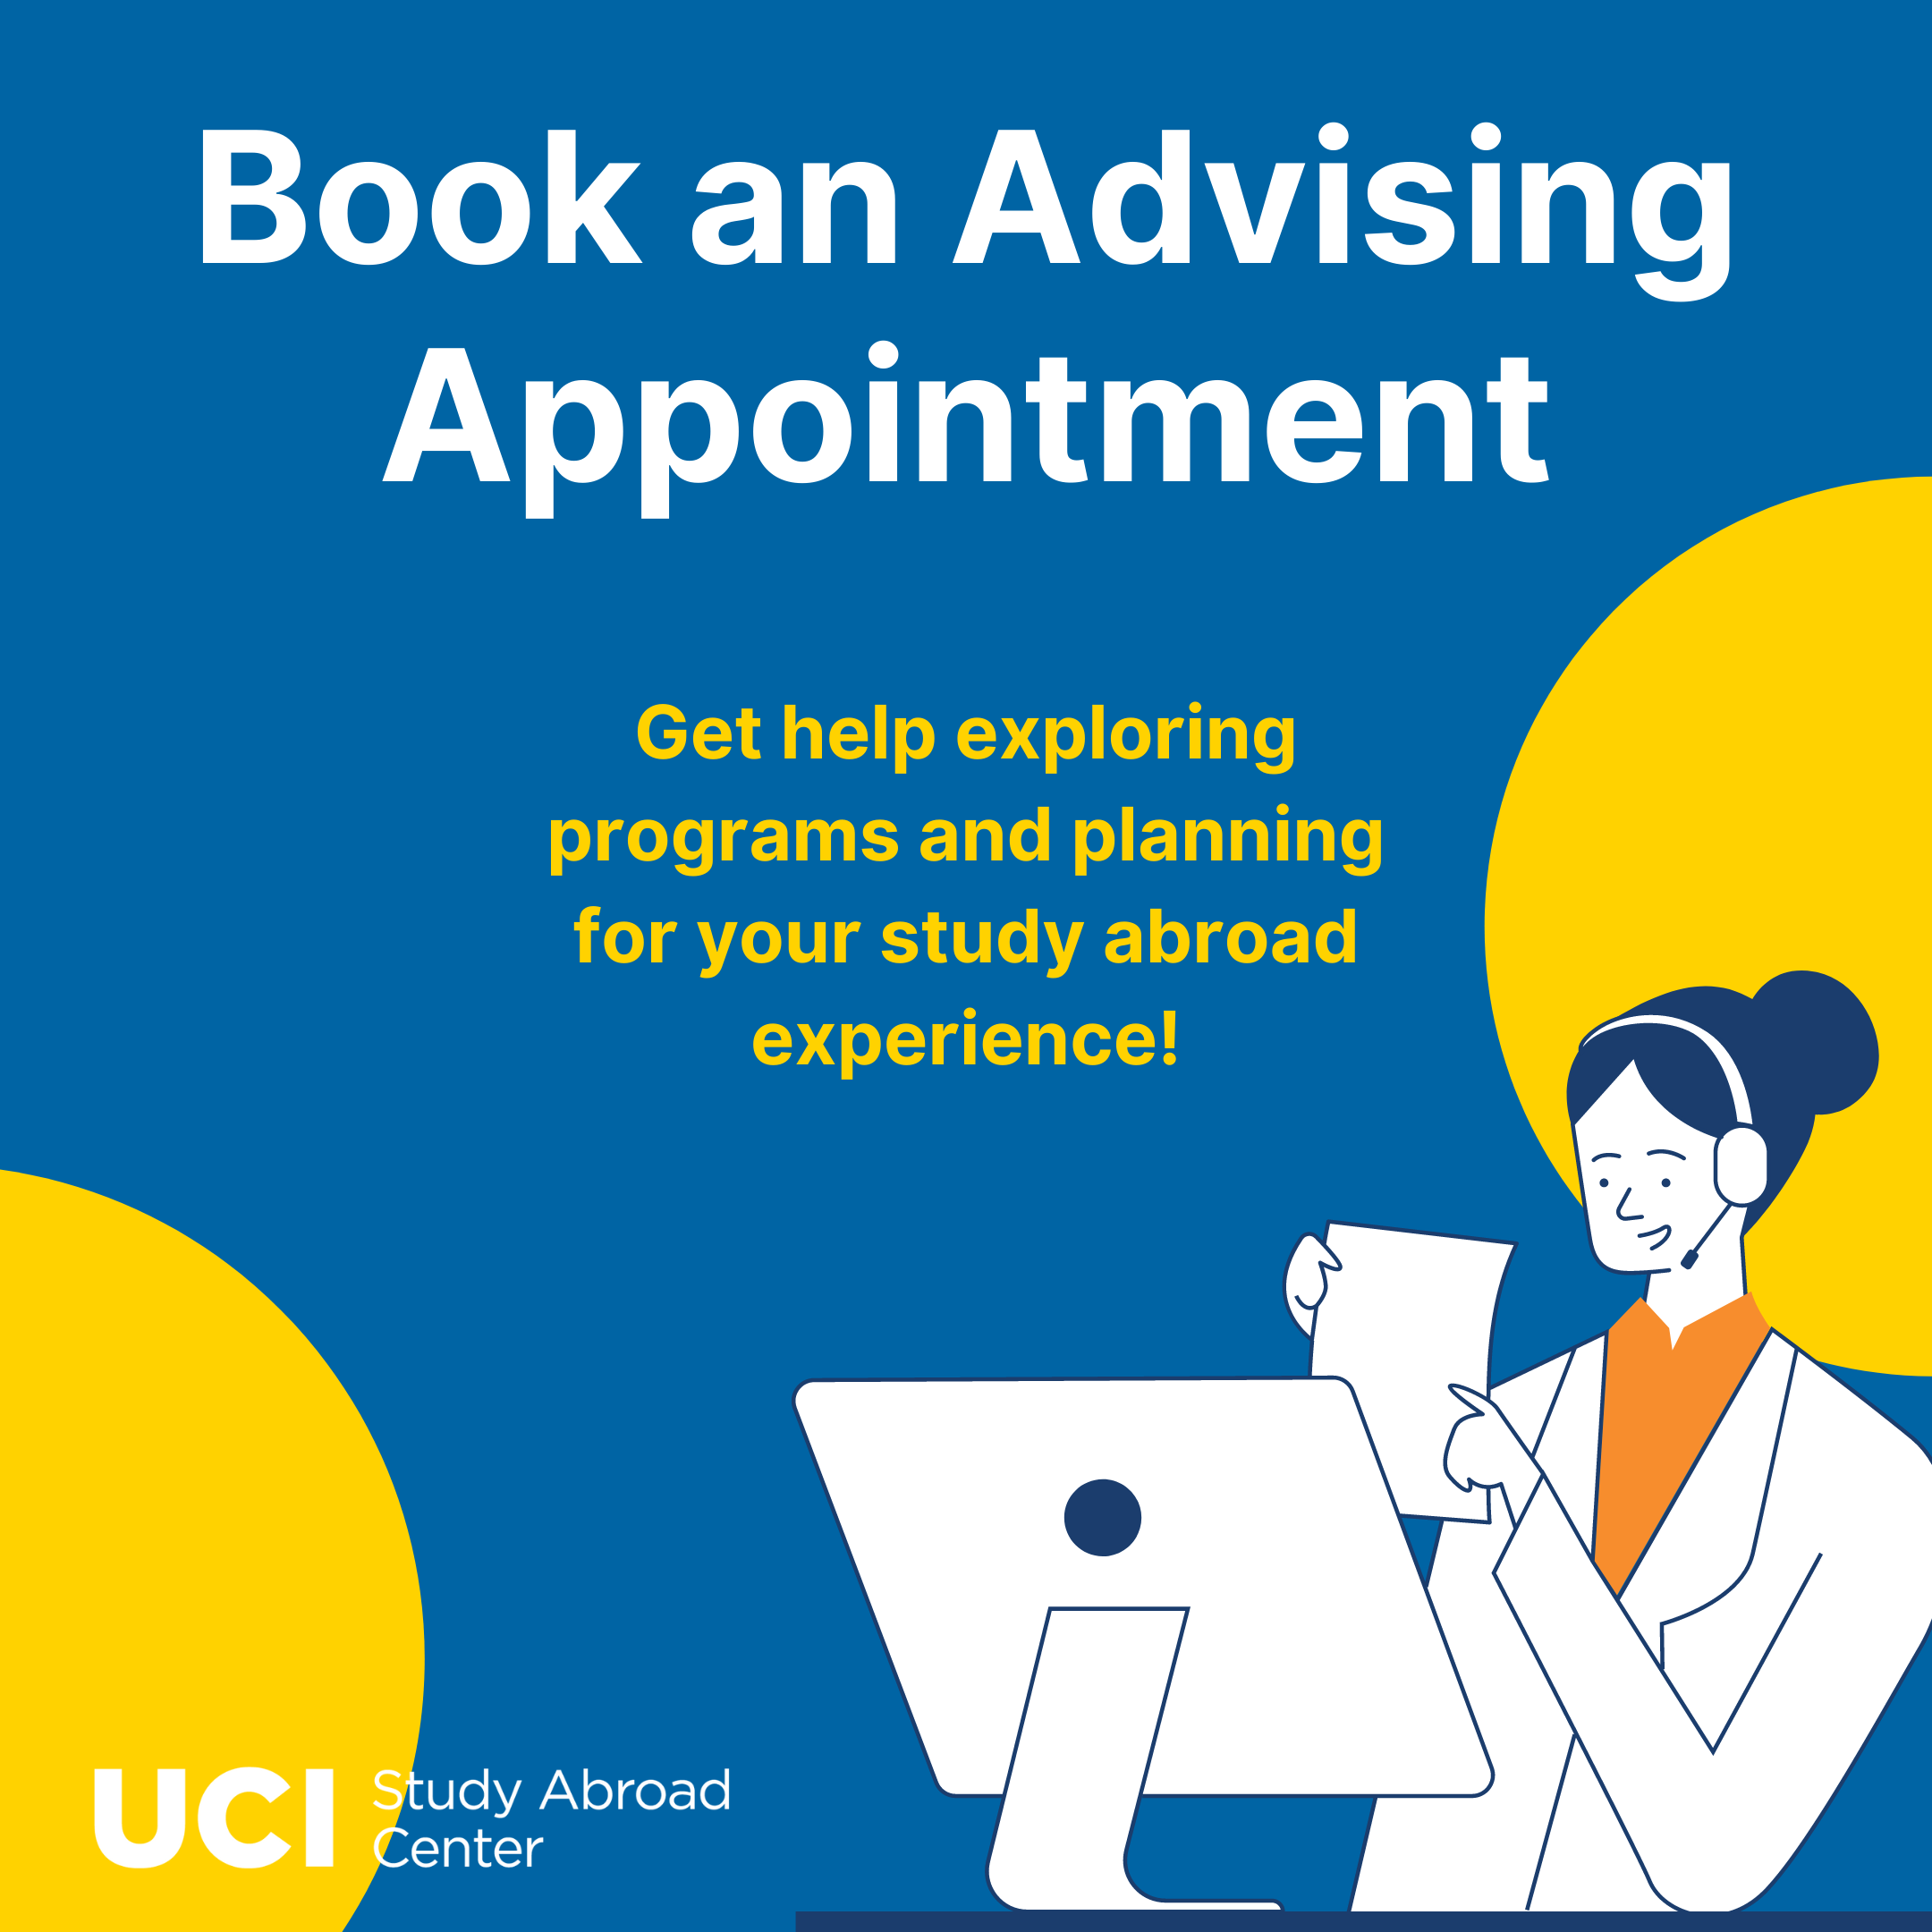 Book an advising appointment